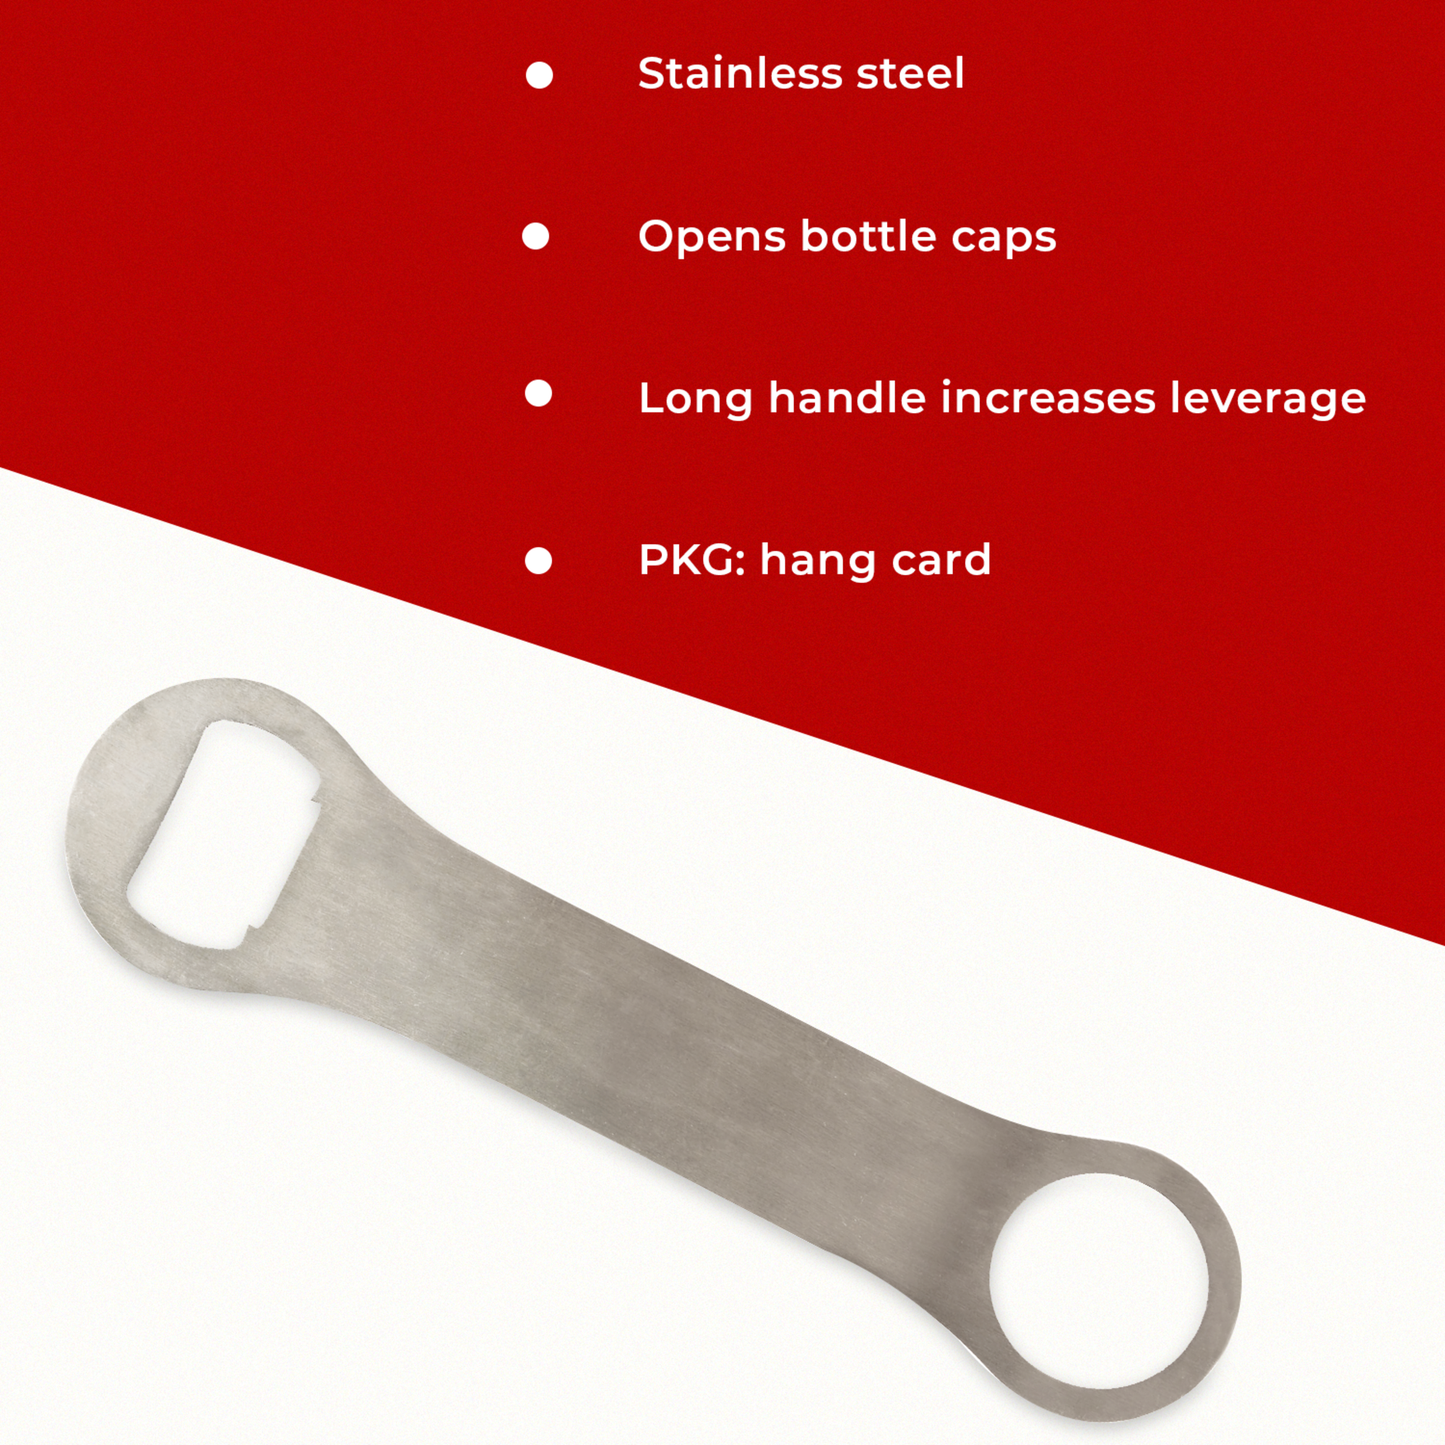 Bottle Opener by Savoy